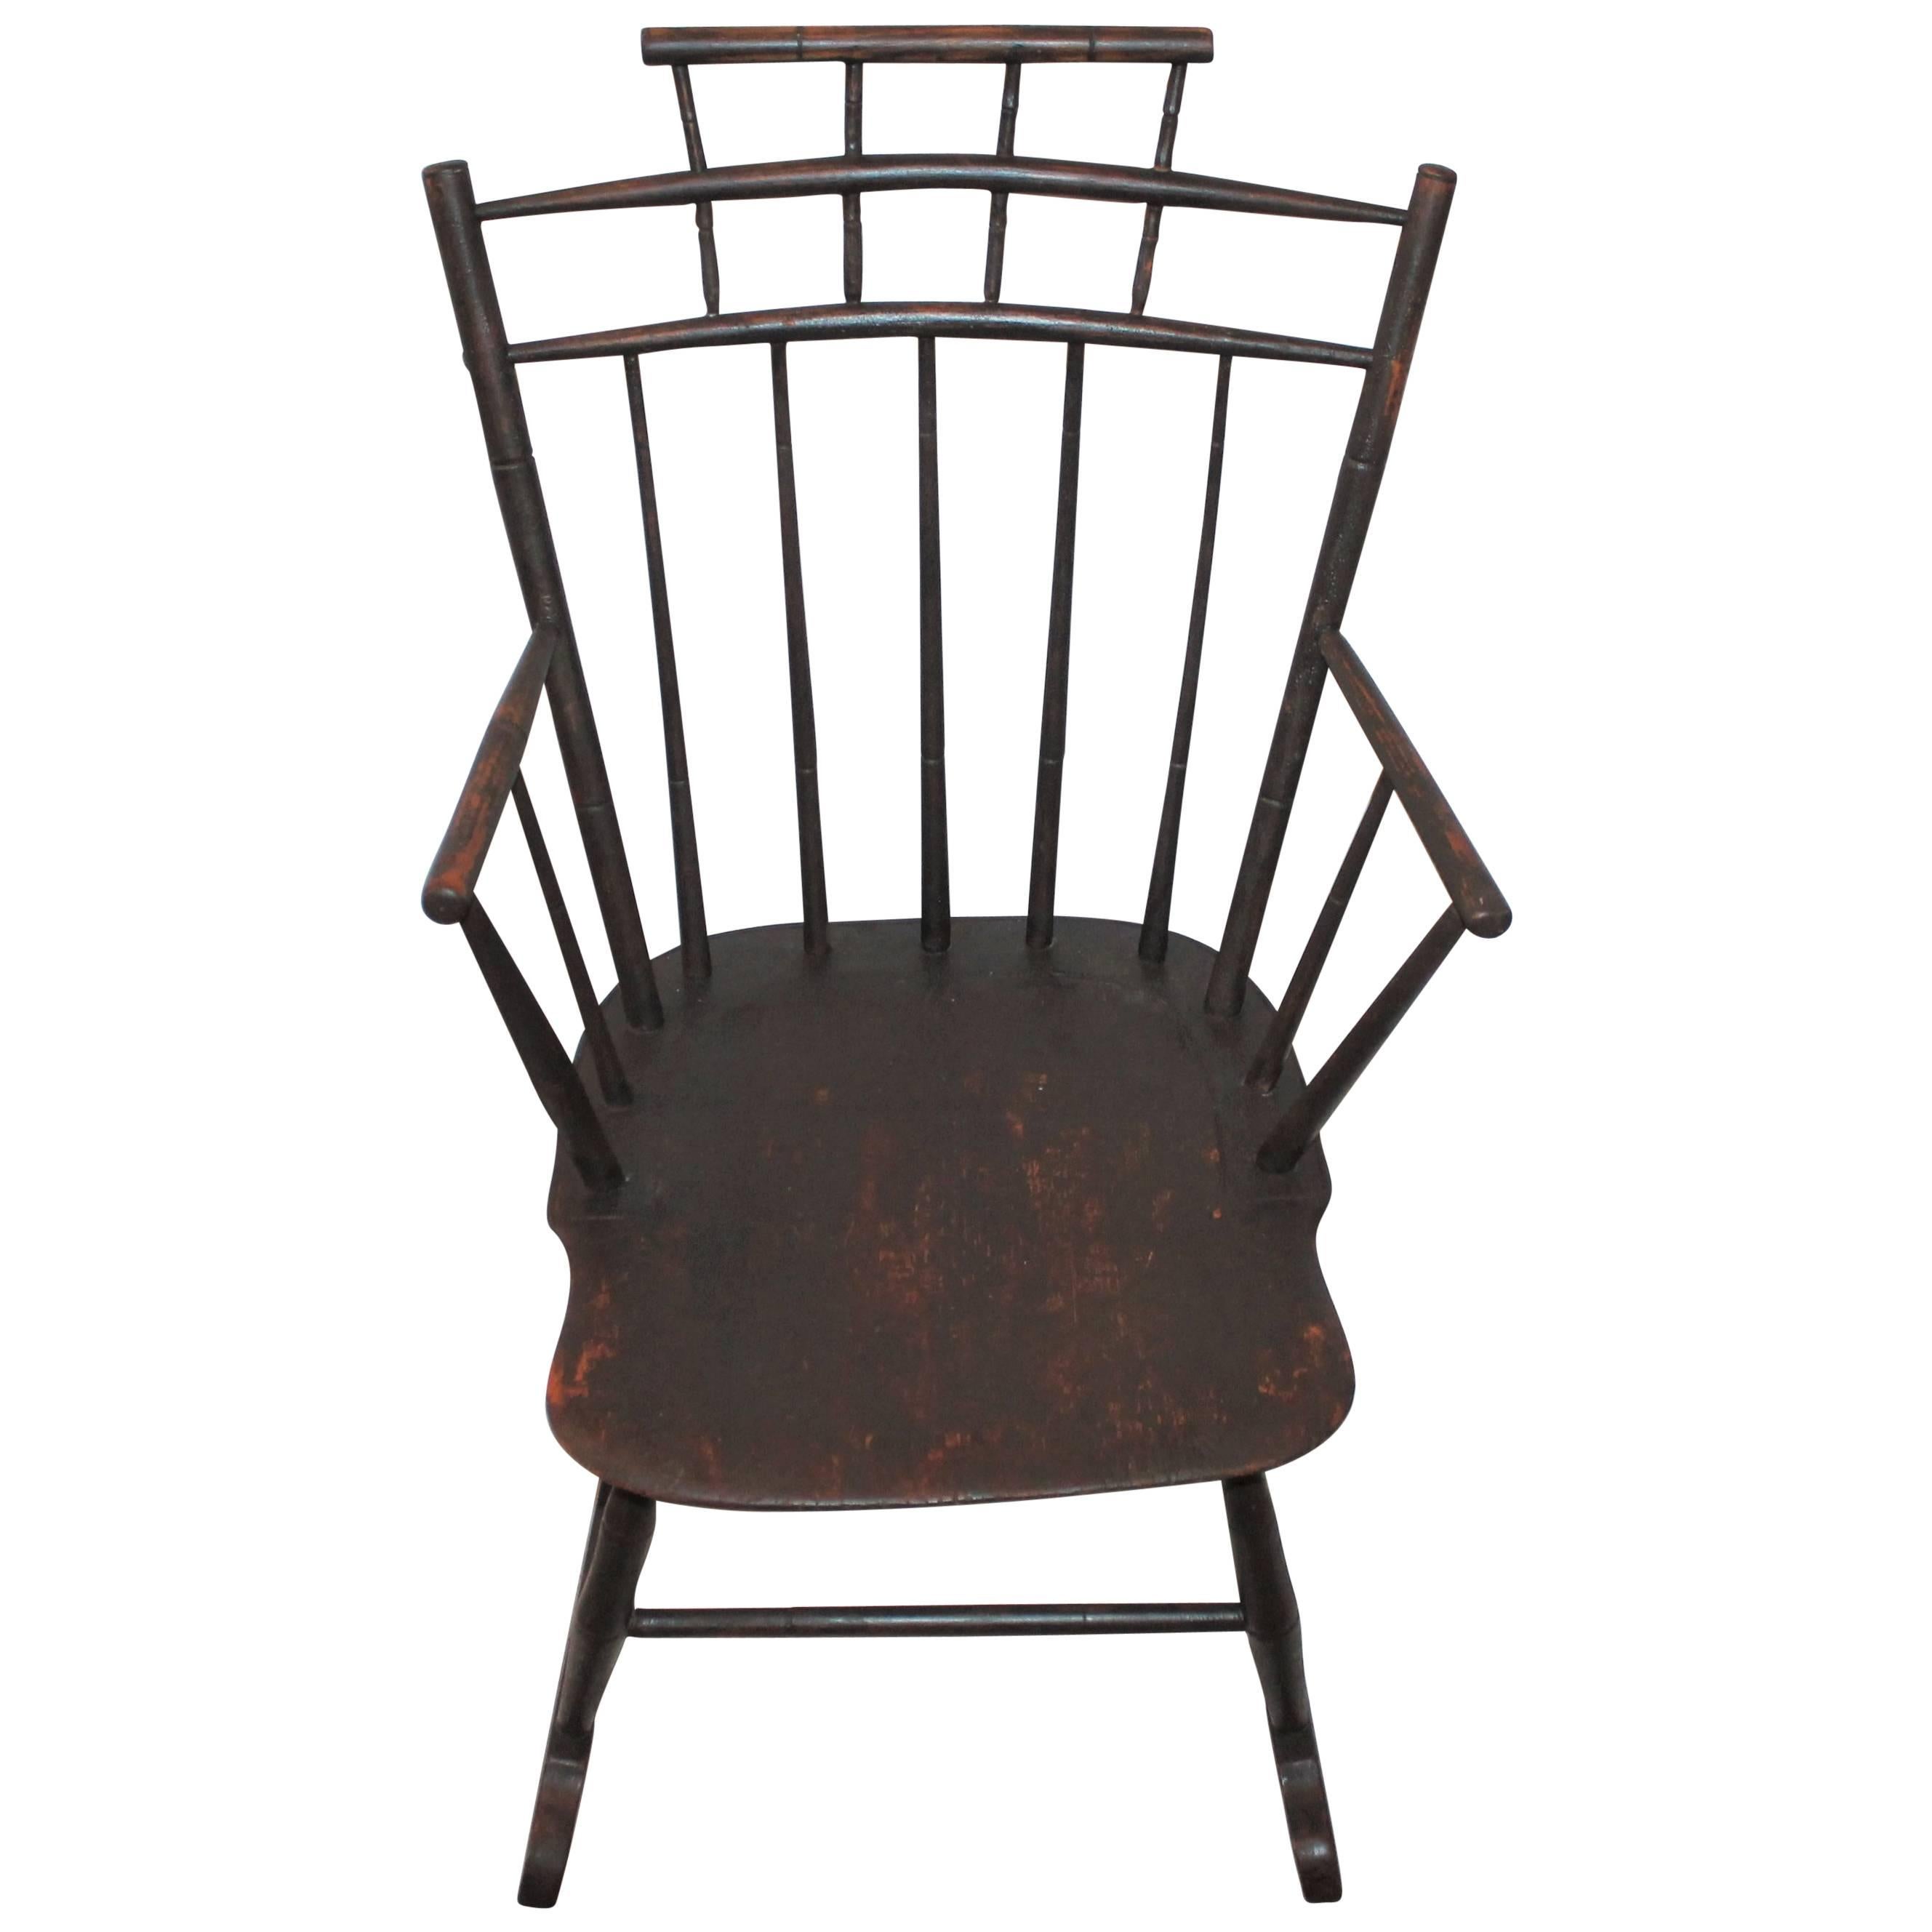 19th Century Brown Painted Windsor Rocking Chair